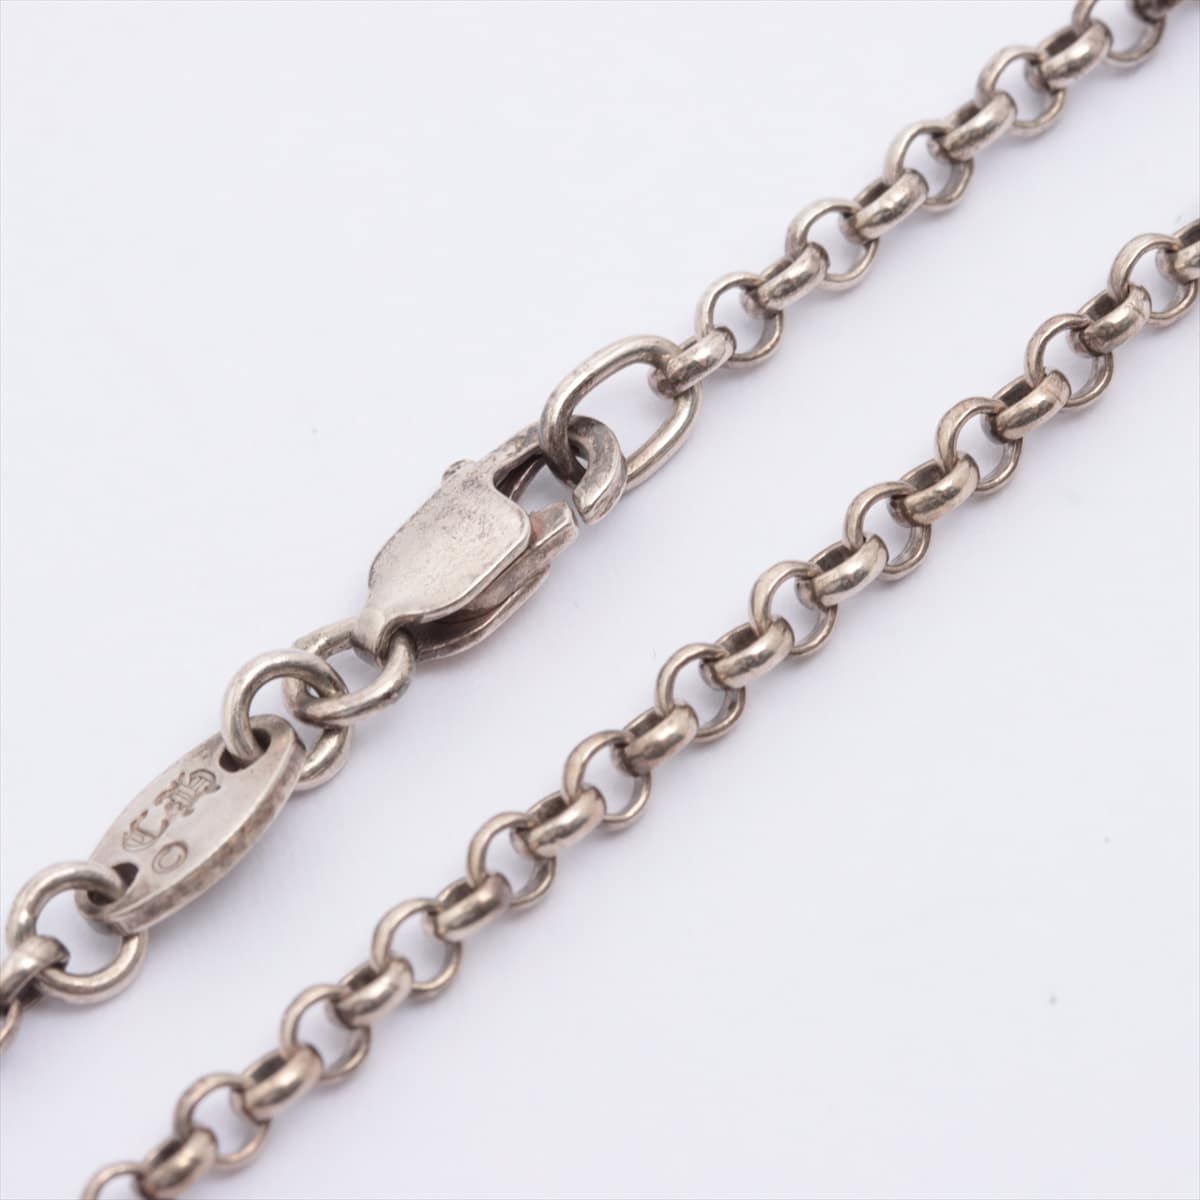 Chrome Hearts Roll Chain 18 Inches Necklace 925 5.2g